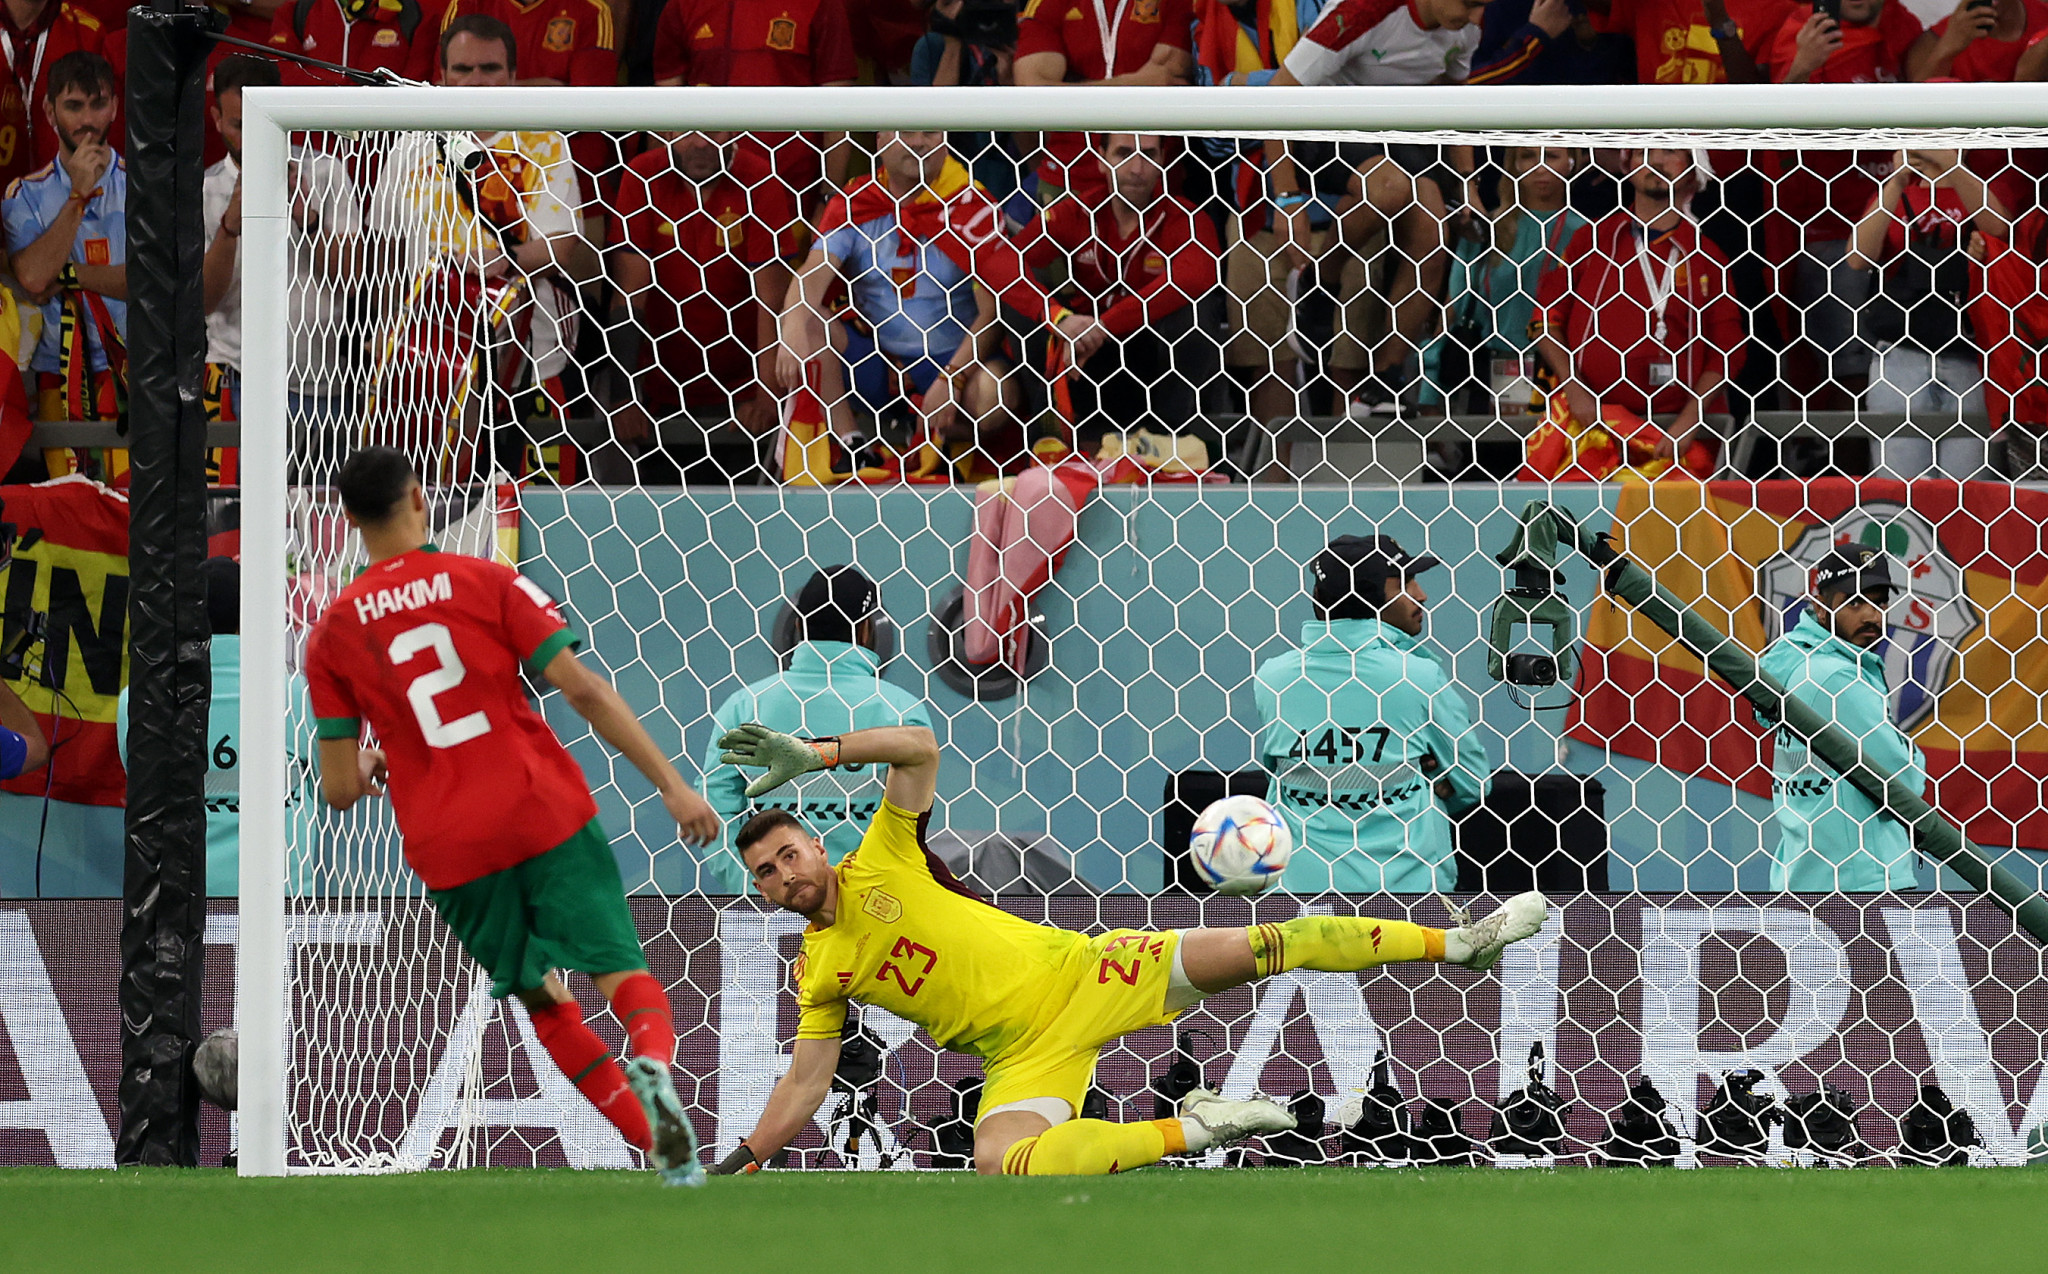 Achraf Hakimi converted the winning penalty in a shootout as Morocco defeated Spain in the round of 16 at the 2022 FIFA World Cup in Qatar ©Getty Images